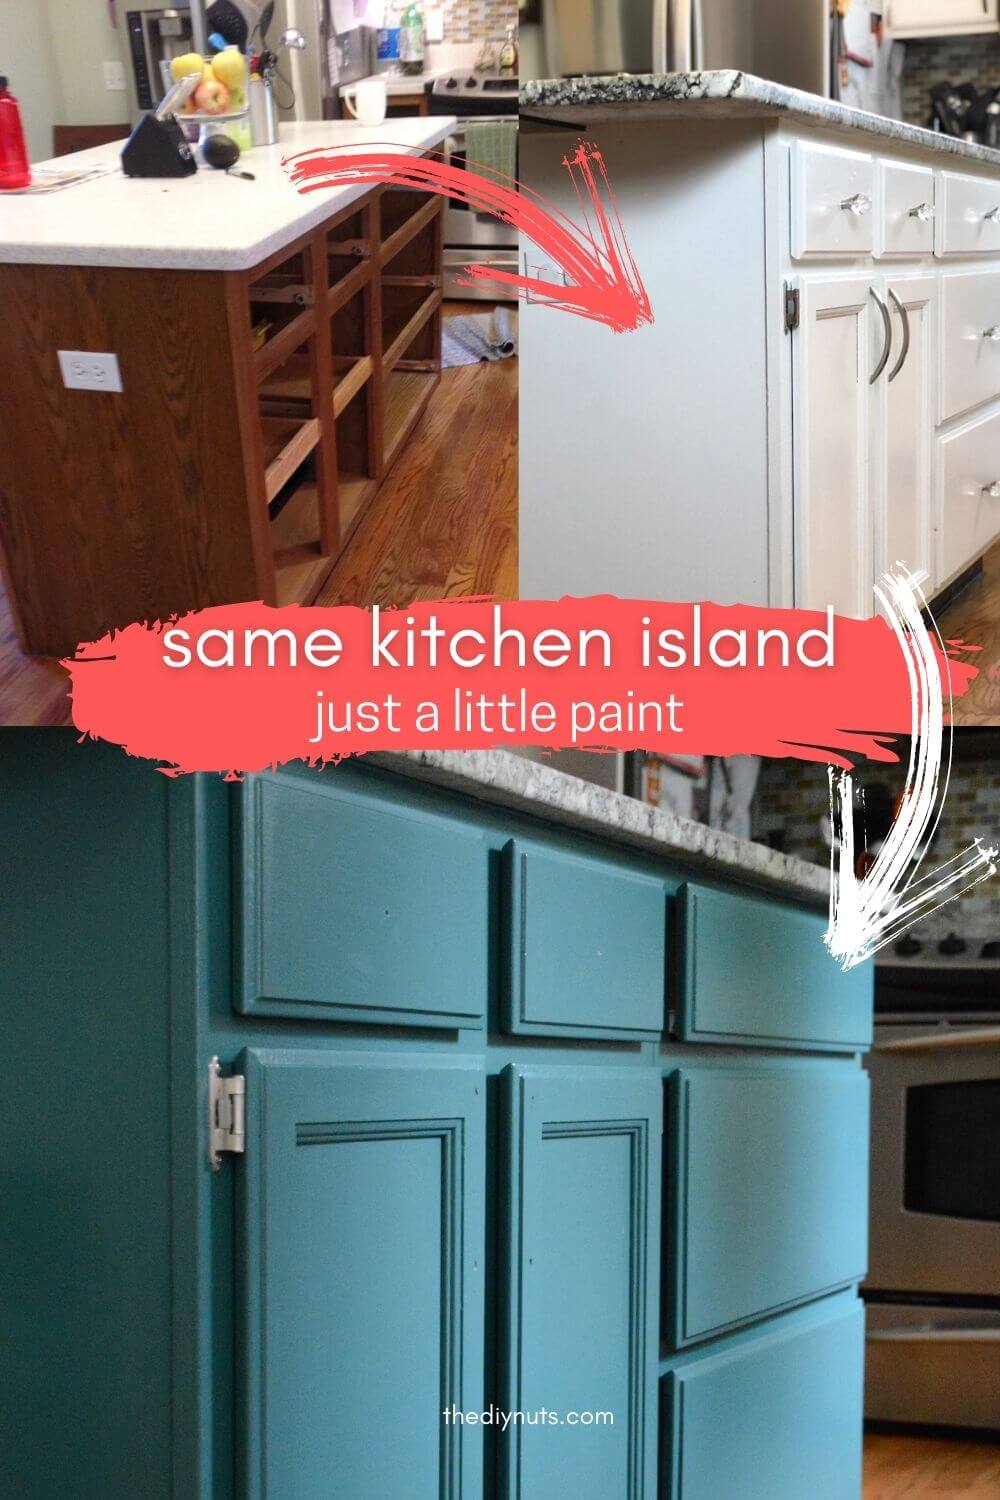 How To Repaint Painted Cabinets Our Green Kitchen Cabinets   The ...